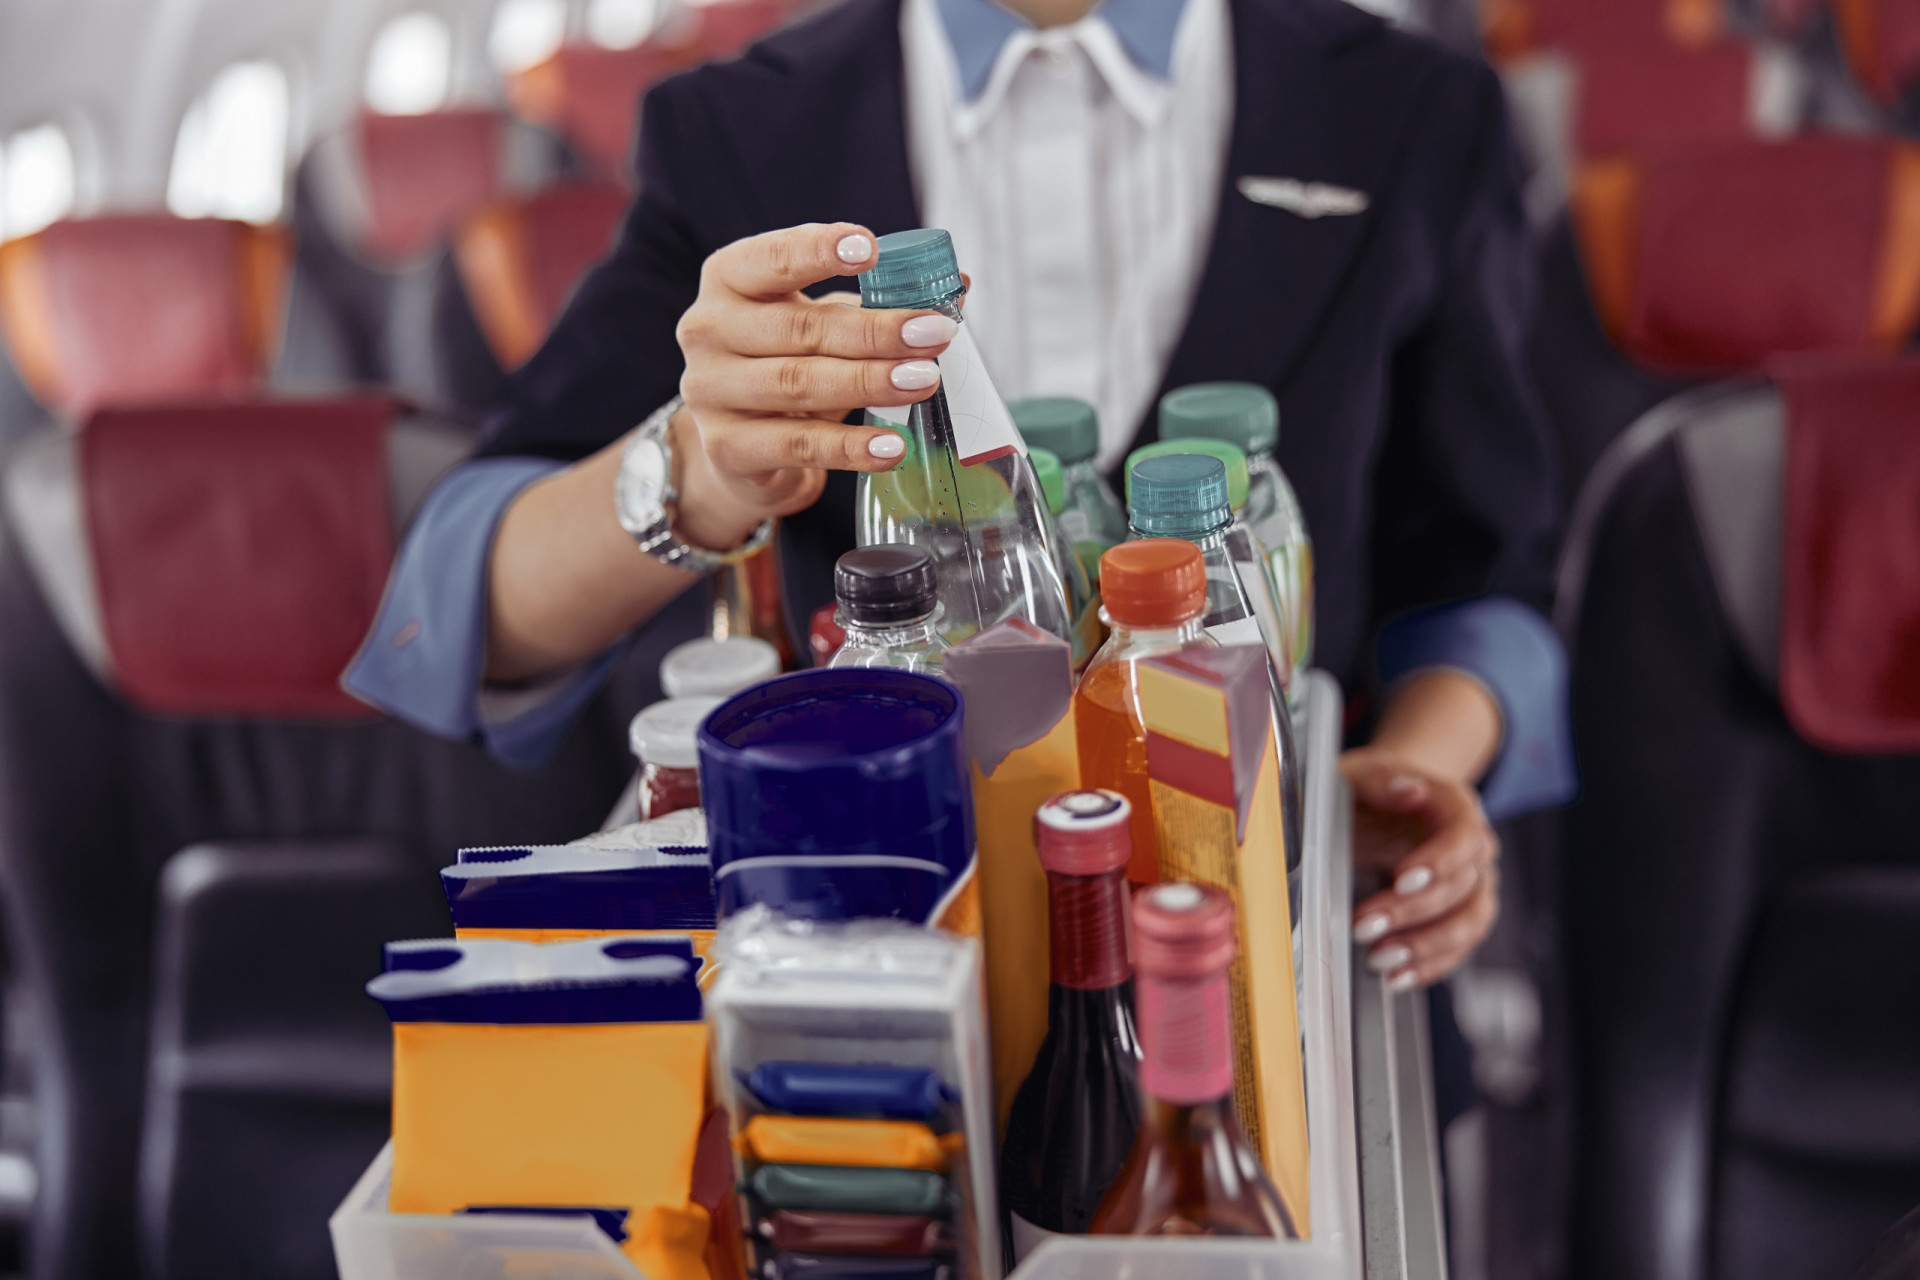 <p>Privo is short for provisioning and refers to every consumable item on the aircraft, including beverages, snacks, and meals. </p><p><a href="https://www.msn.com/en-us/community/channel/vid-7xx8mnucu55yw63we9va2gwr7uihbxwc68fxqp25x6tg4ftibpra?cvid=94631541bc0f4f89bfd59158d696ad7e">Follow us and access great exclusive content every day</a></p>